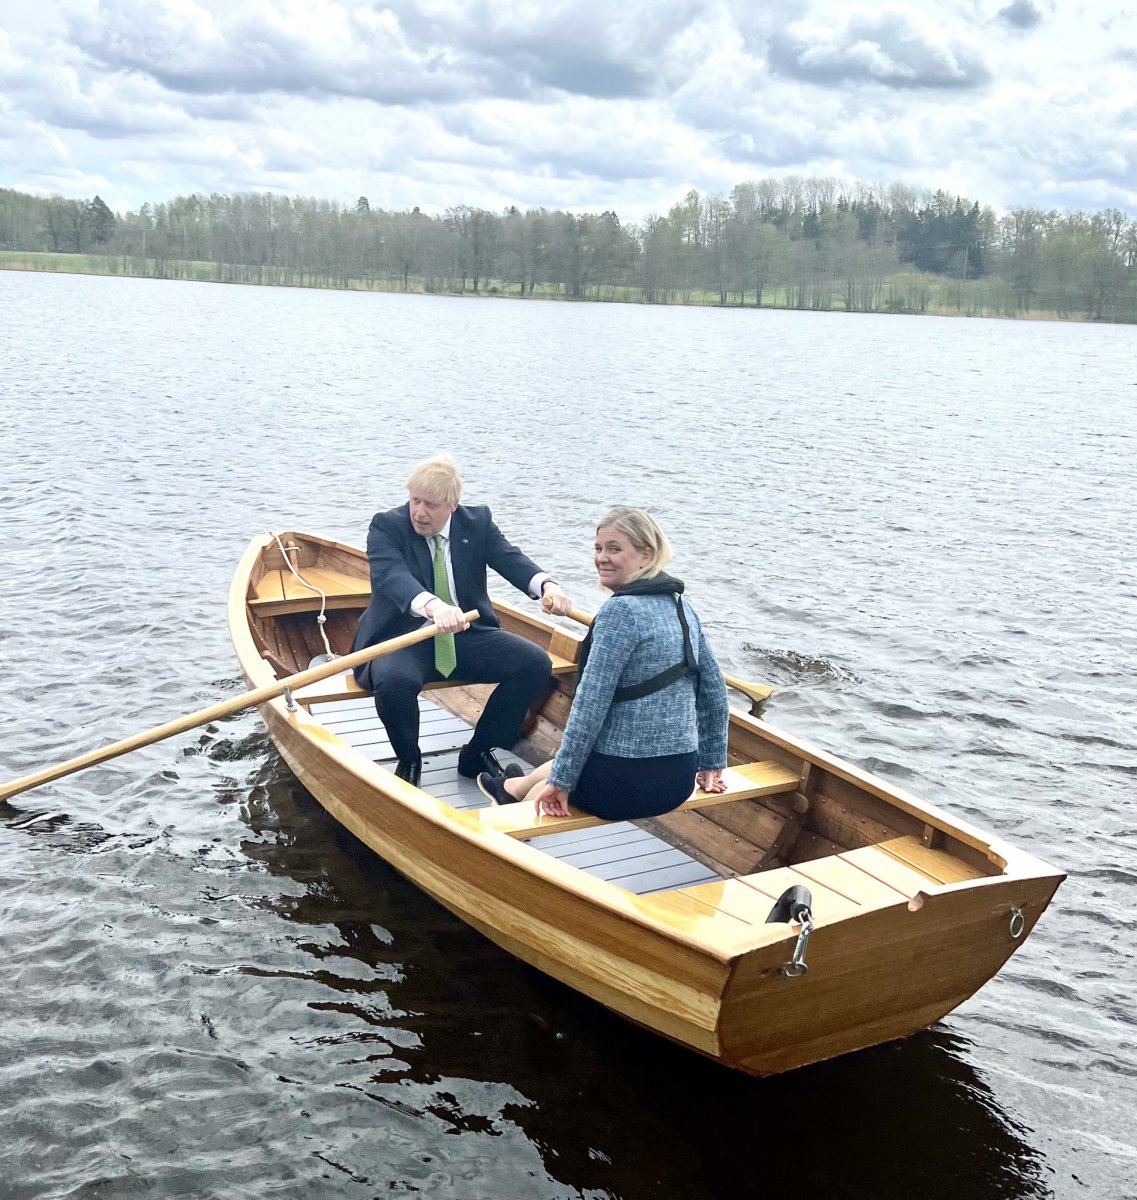 Visiting Sweden, Boris Johnson's boat trip with Prime Minister Andersson #1